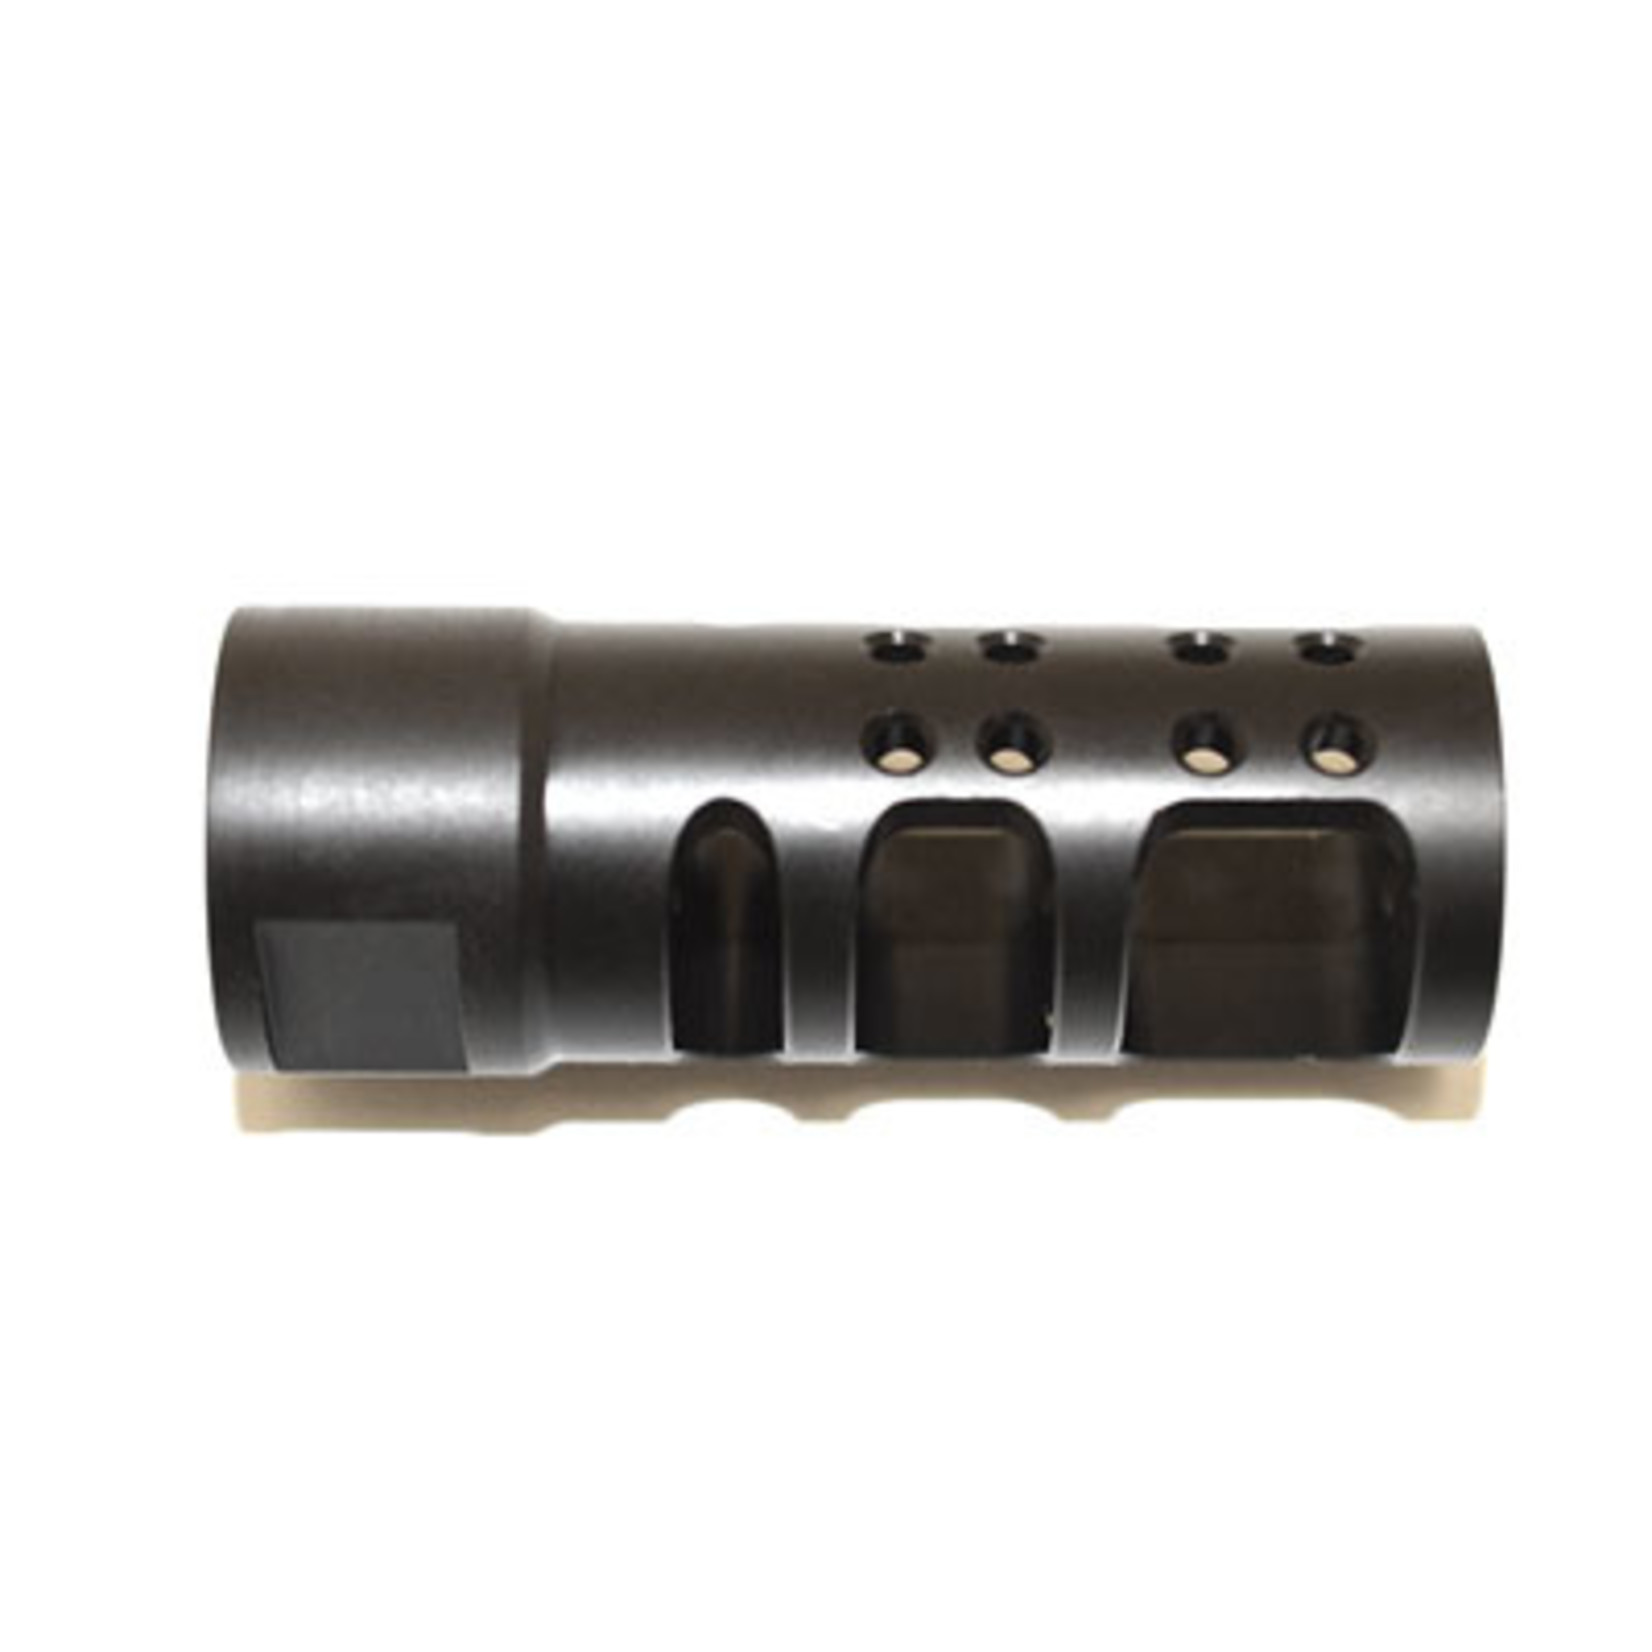 Spike's Tactical SPIKE'S R2 MUZZLE BRAKE 5.56 BLK